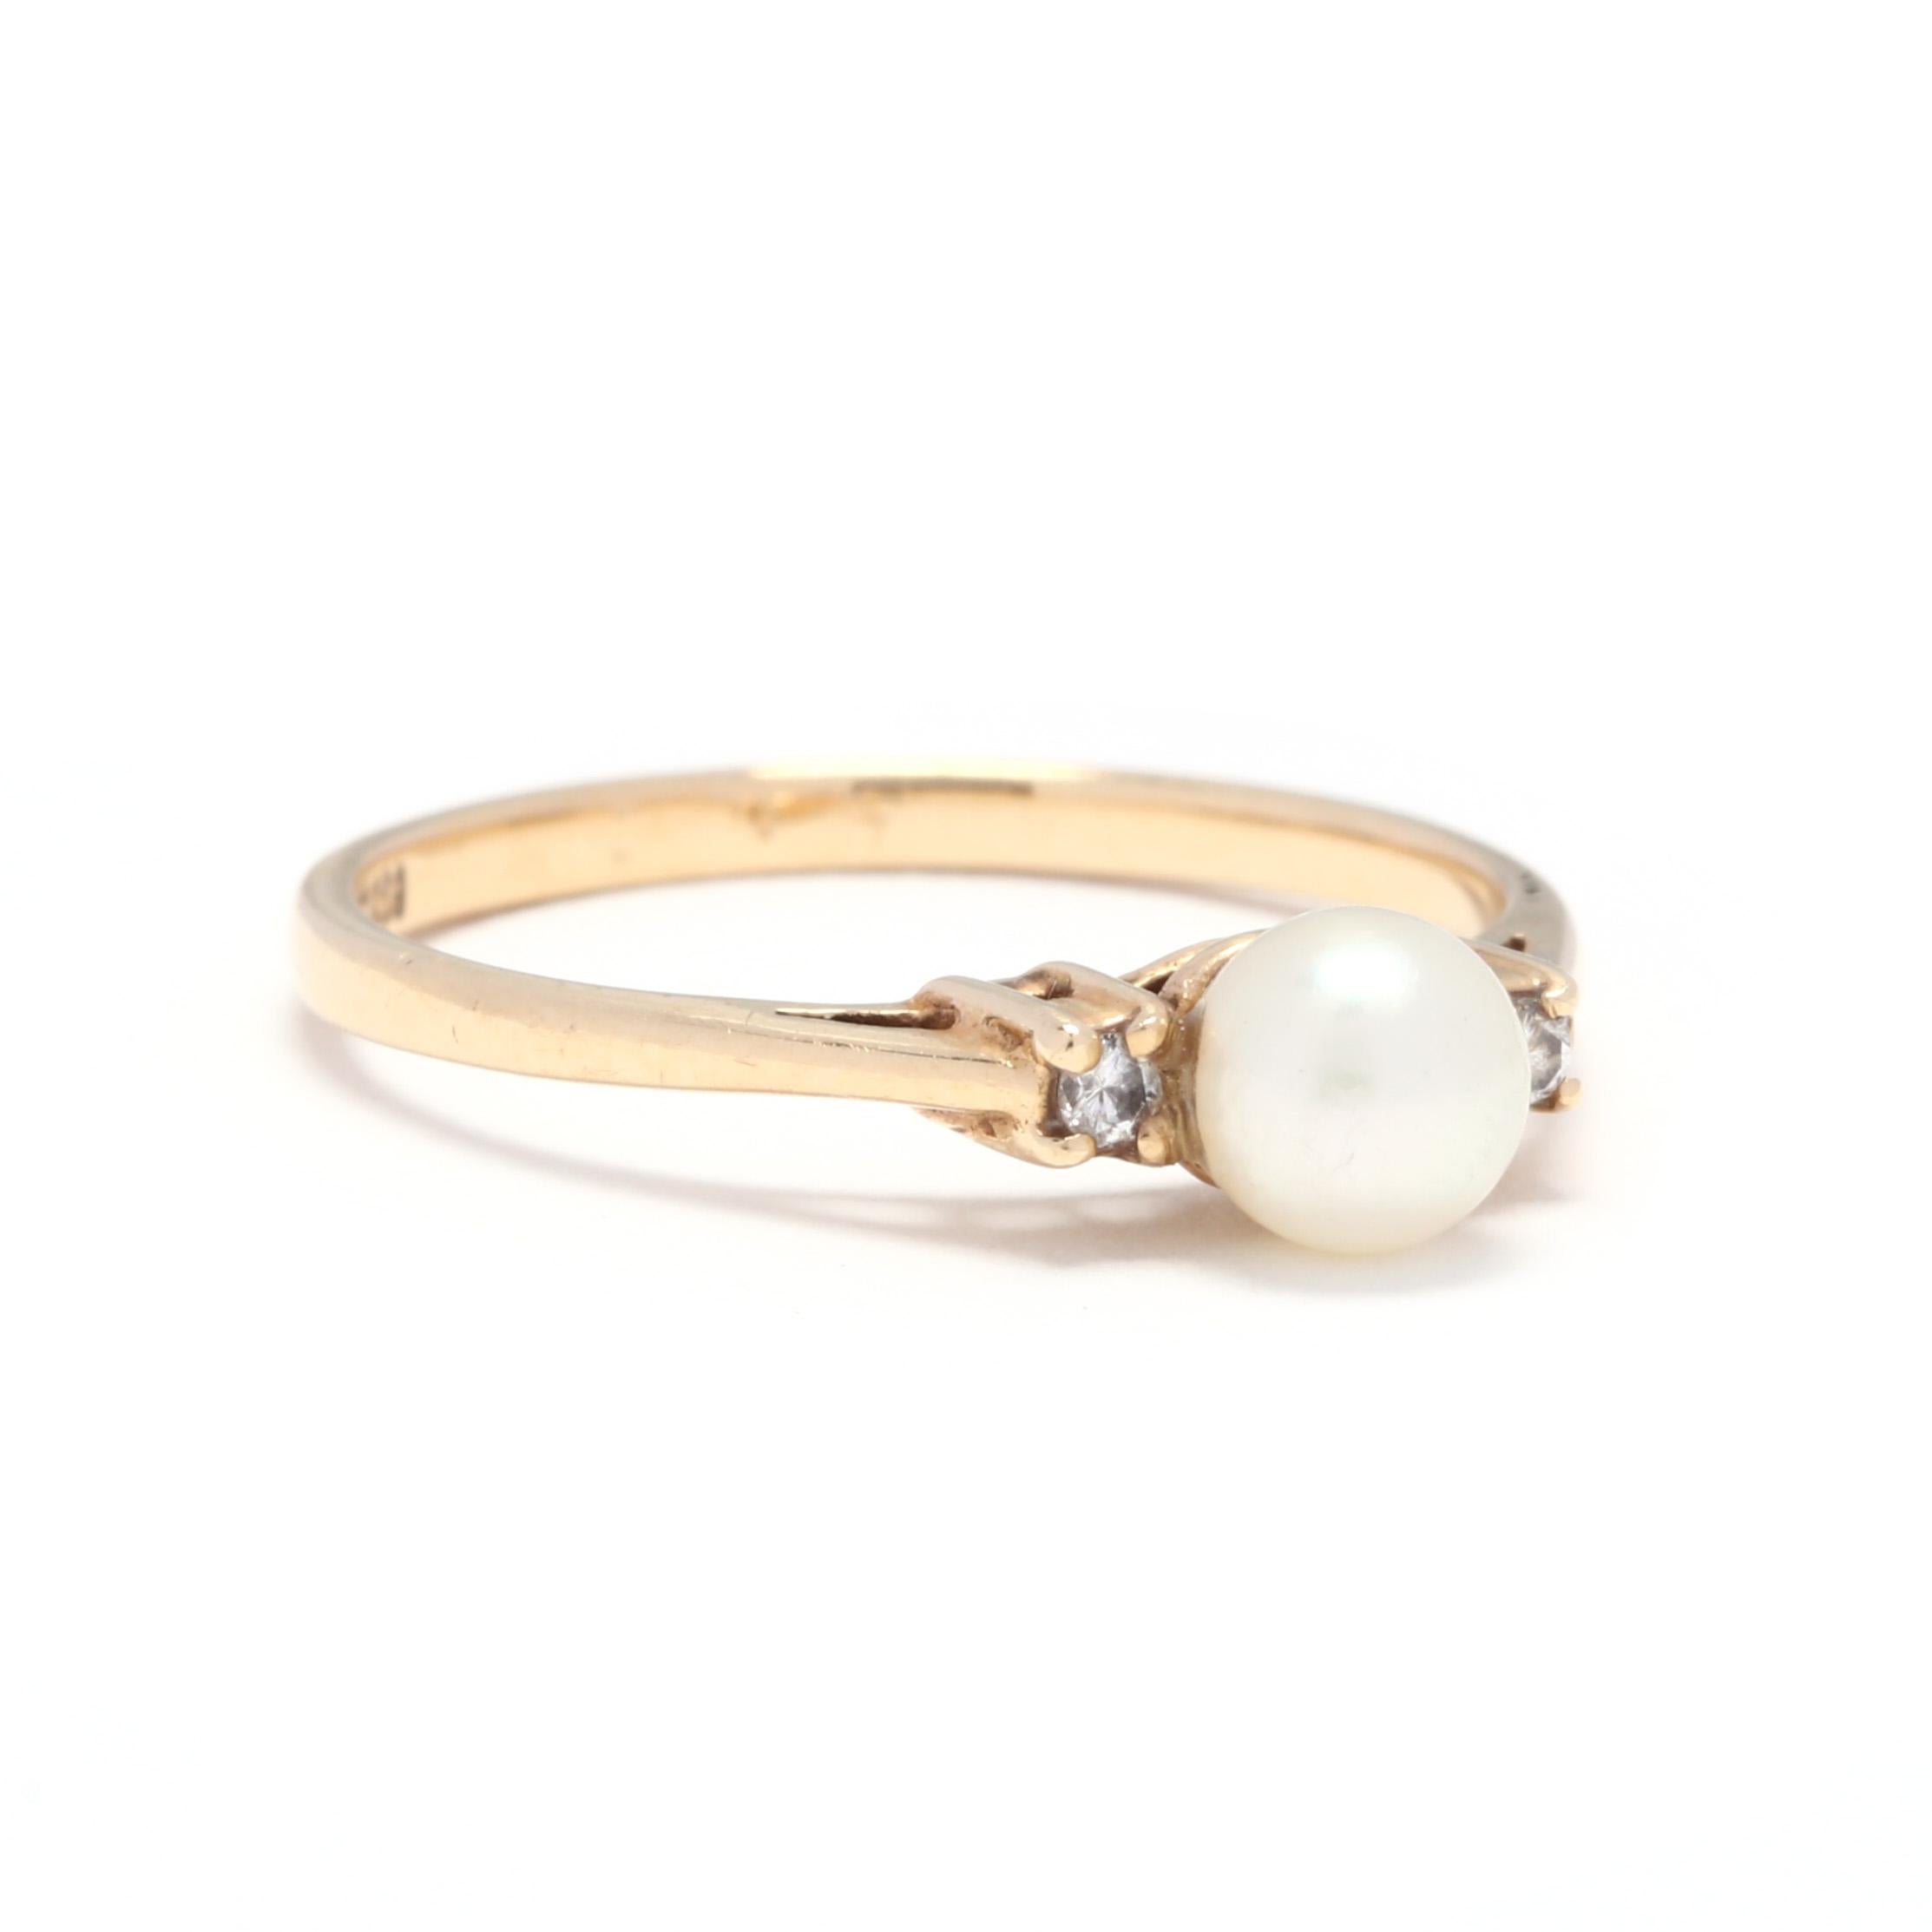 A 14 karat yellow gold, pearl and diamond three stone ring. This ring features a round bead, white pearl center stone with a full cut round diamond on either side and a slightly tapered shank.

Stones:
- pearl
- round bead, 1 stone
- 5.1 mm

-